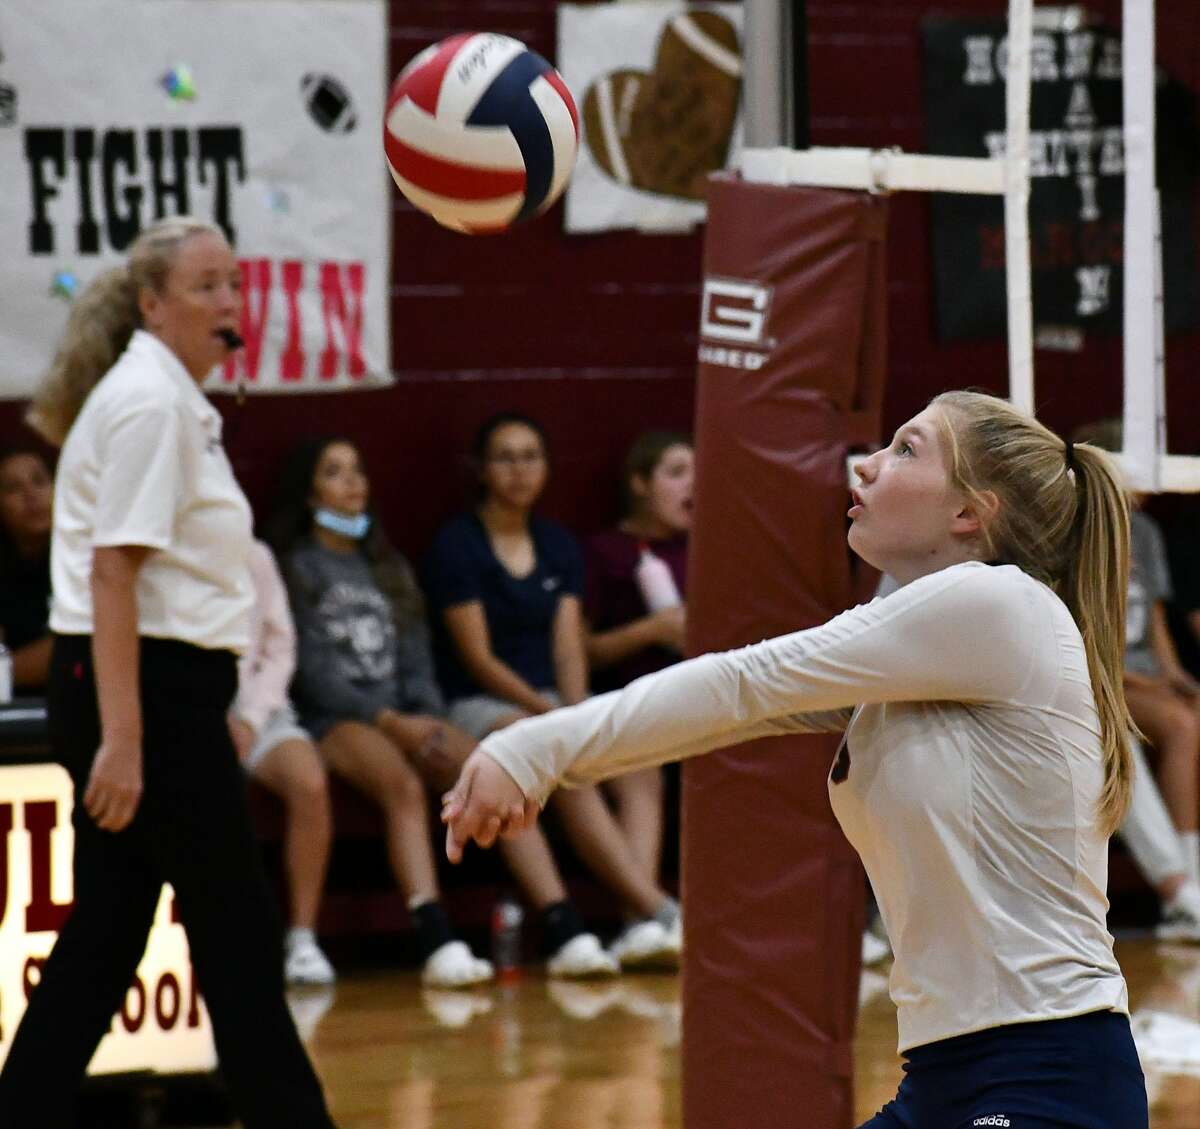 Tulia hosted Plainview in a non-district high school volleyball game on Saturday, Sept. 19, 2020. Plainview came away with a 3-2 win.